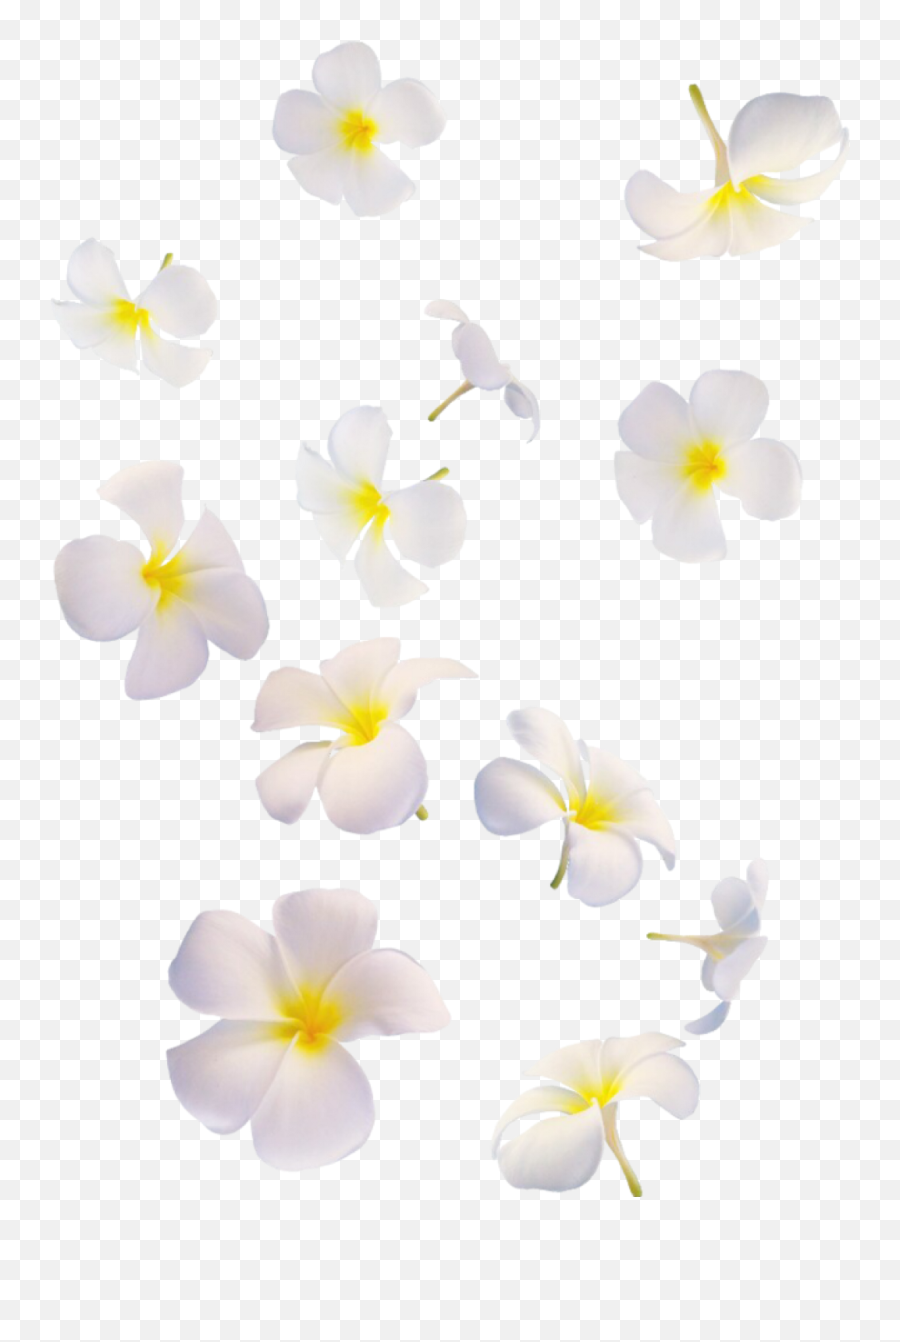 Falling White Flowers Png - Flowers White Falling Png,White Flowers Png